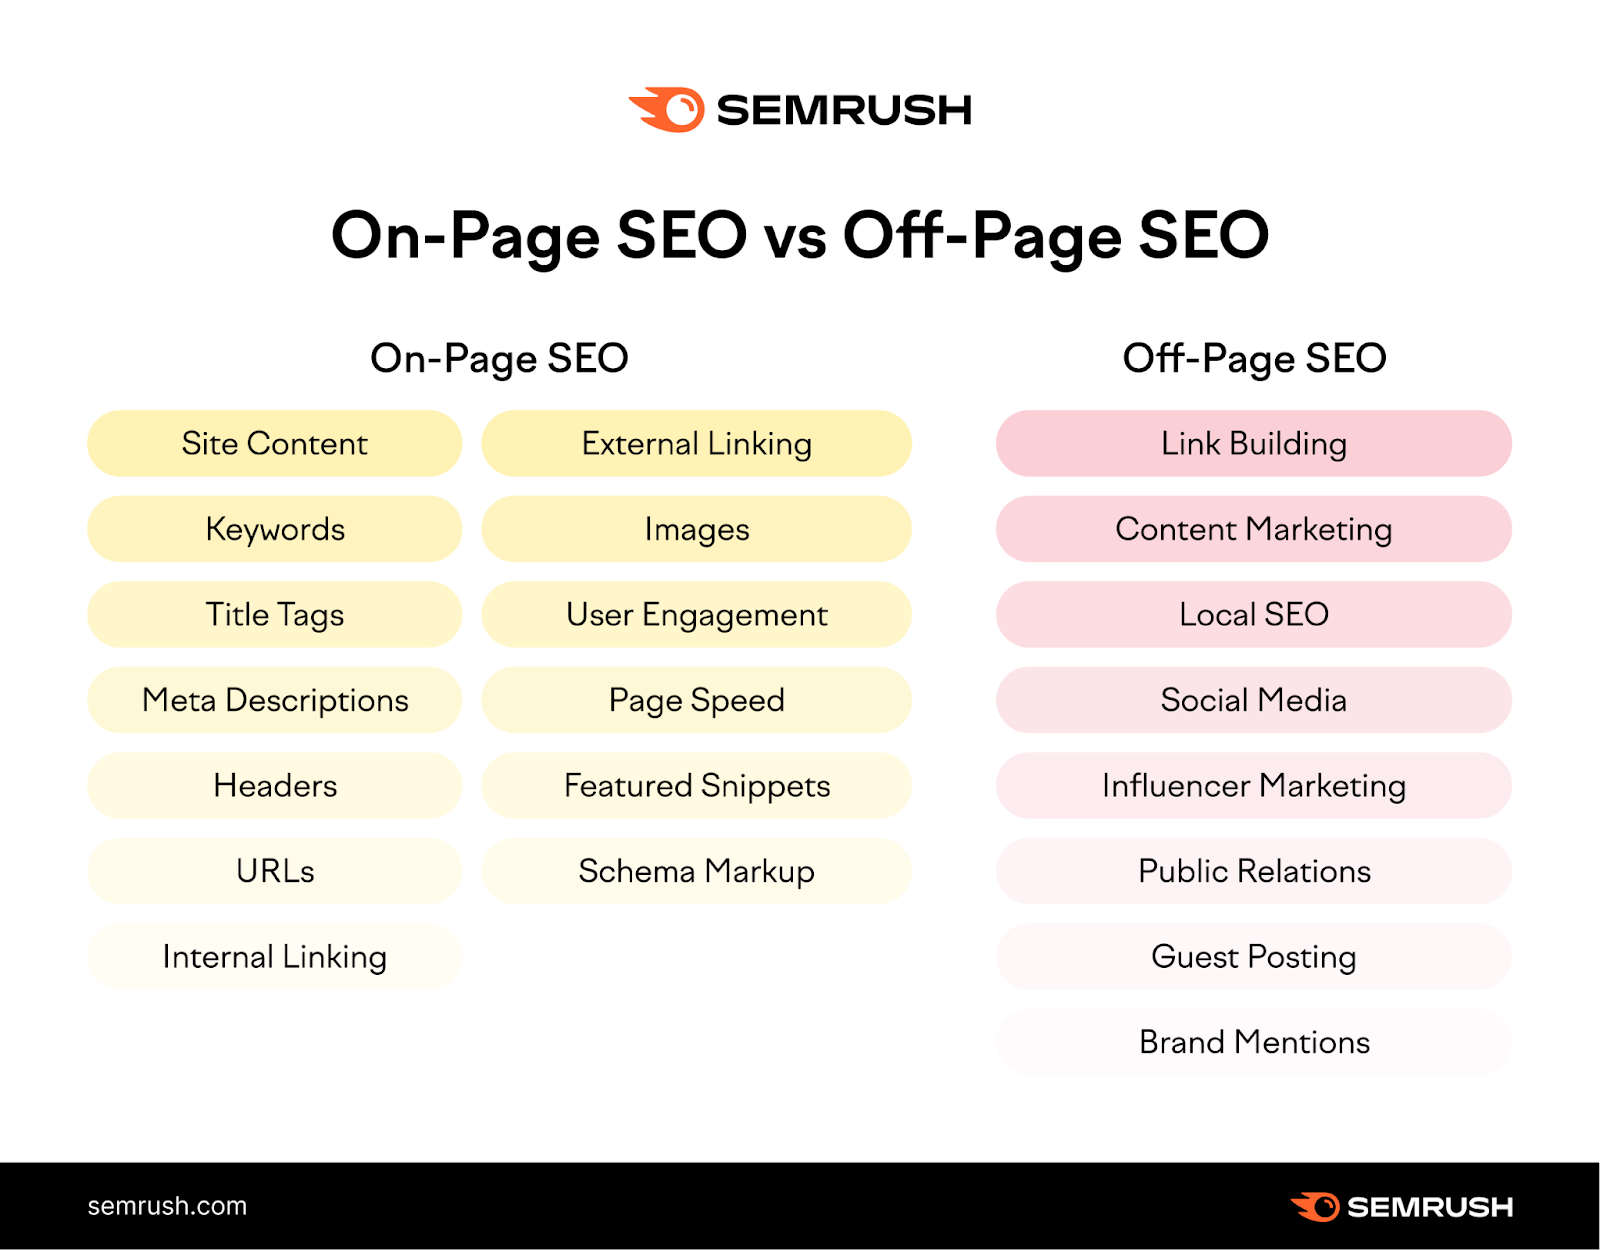 Off-Page SEO Checklist: Our Top 8 Tips